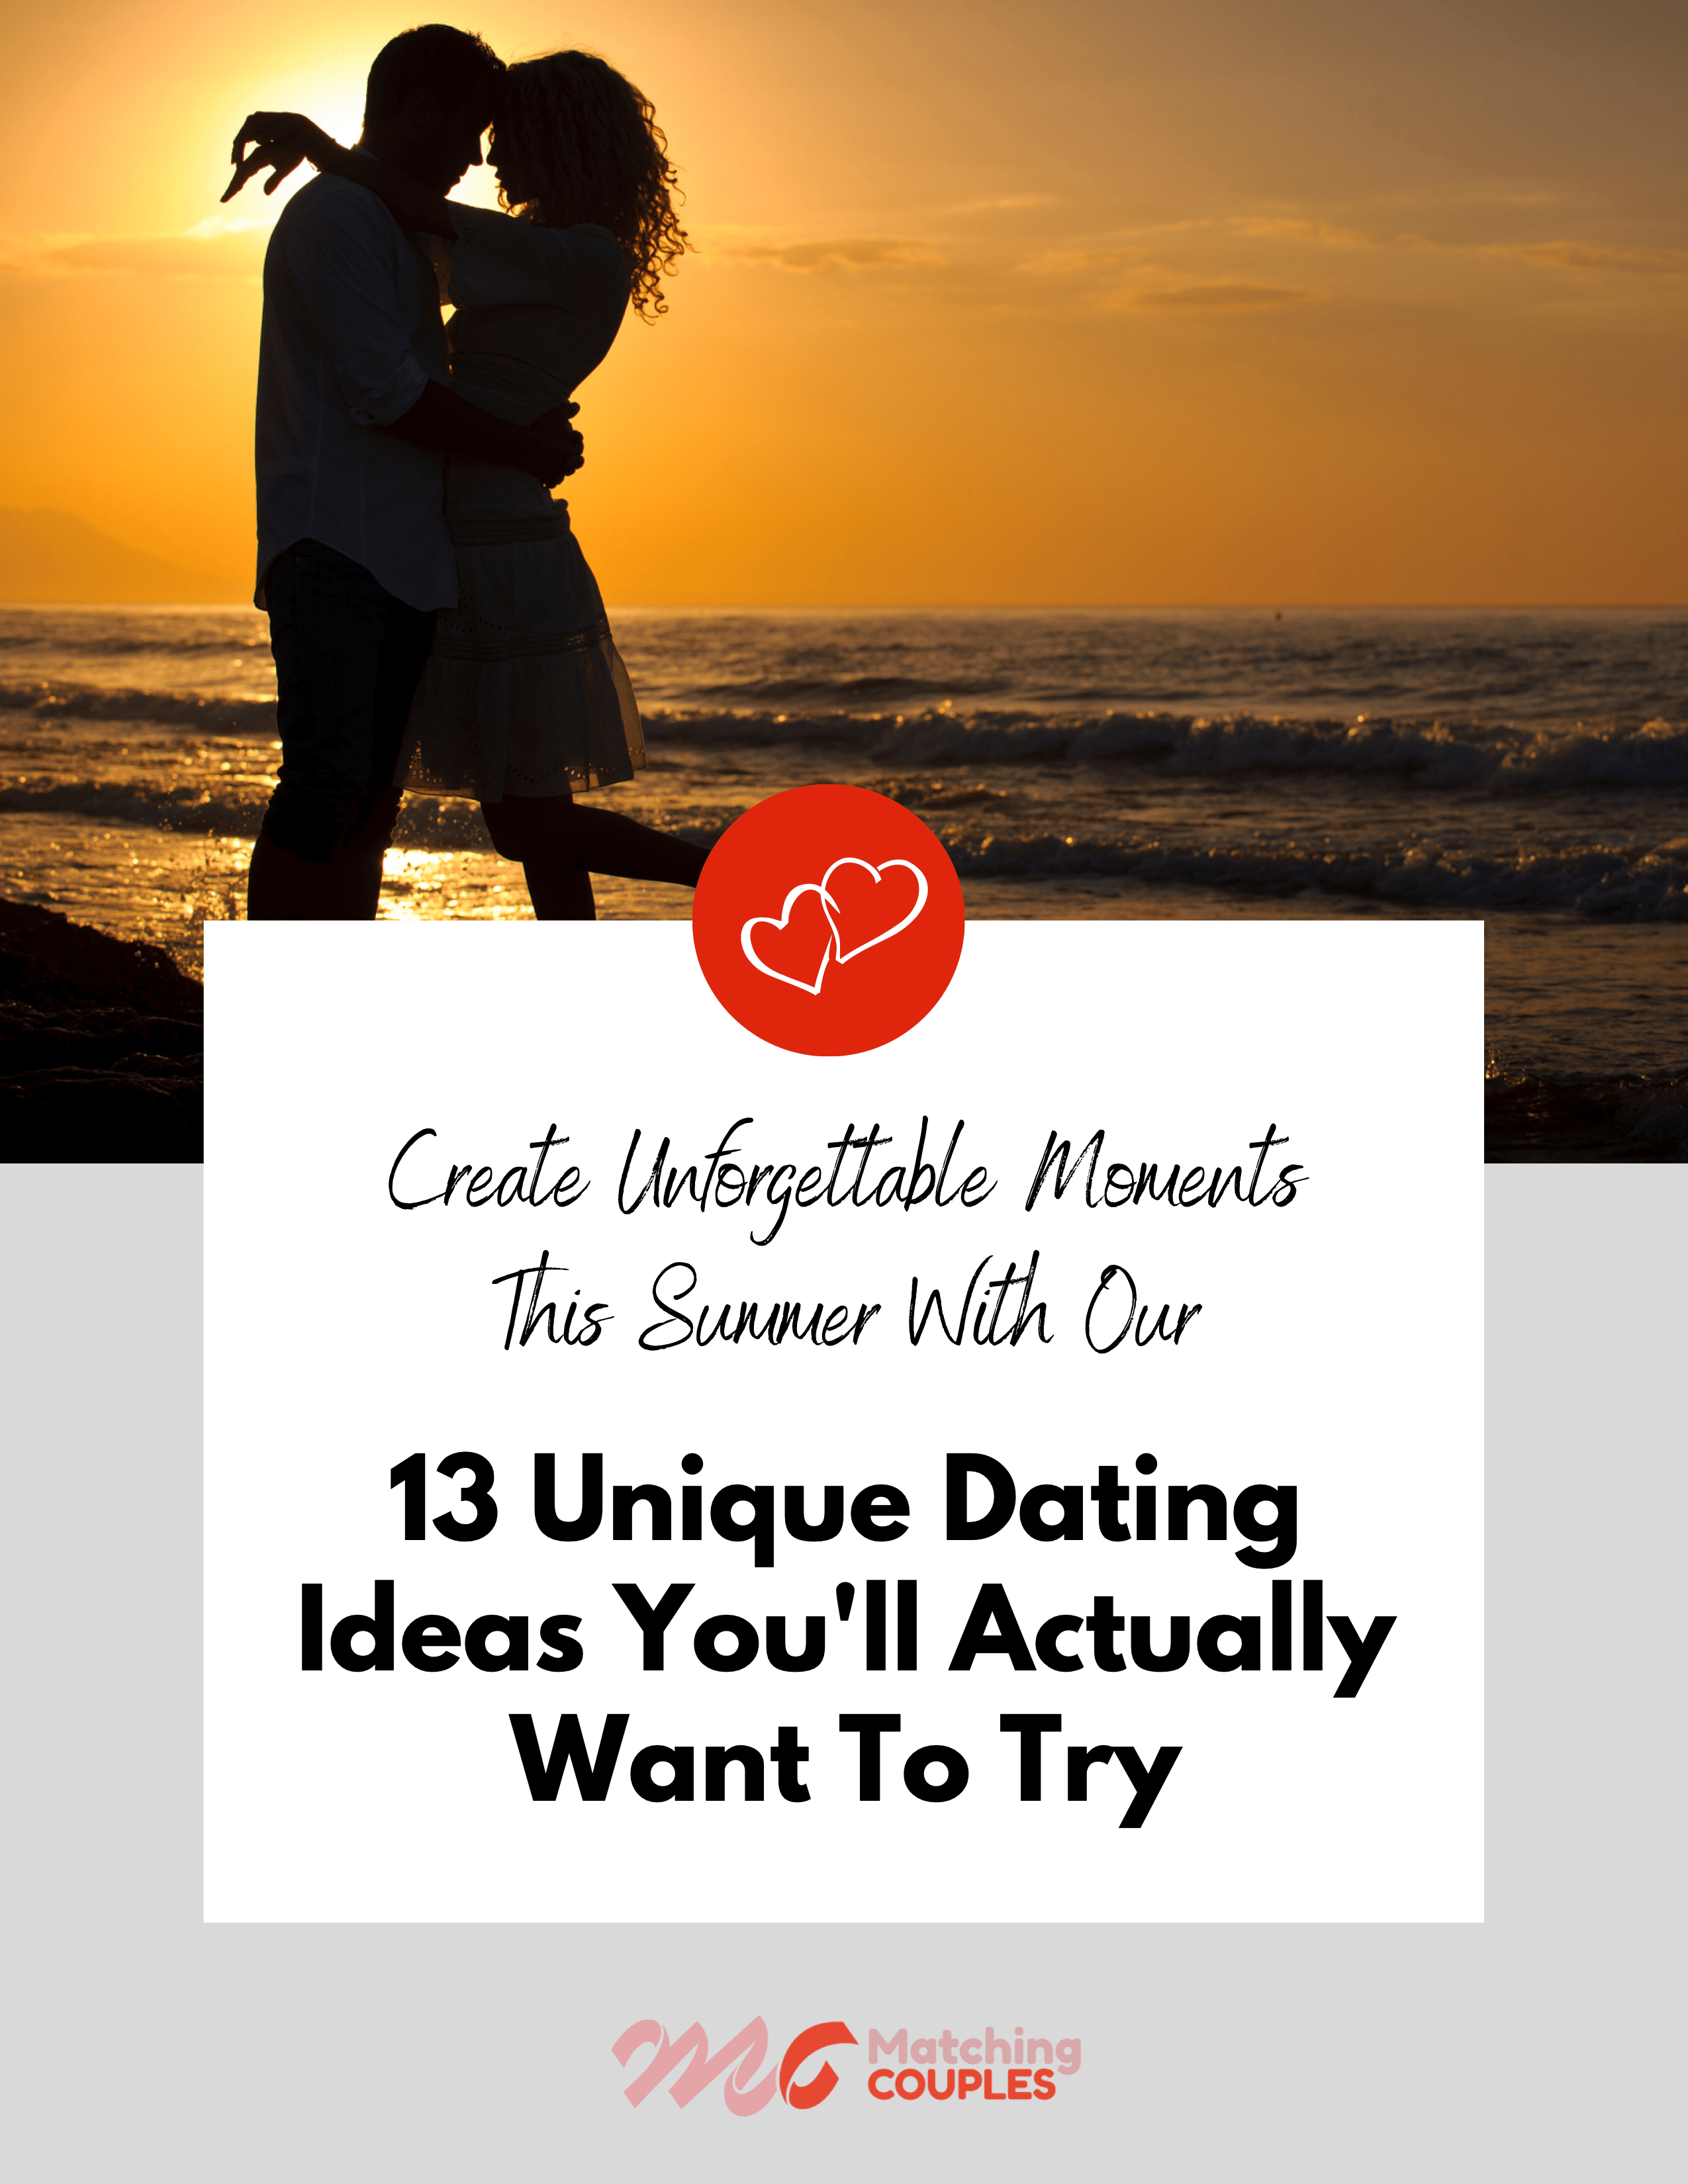 13 Unique Date Ideas You’ll Actually Want To Try This Summer